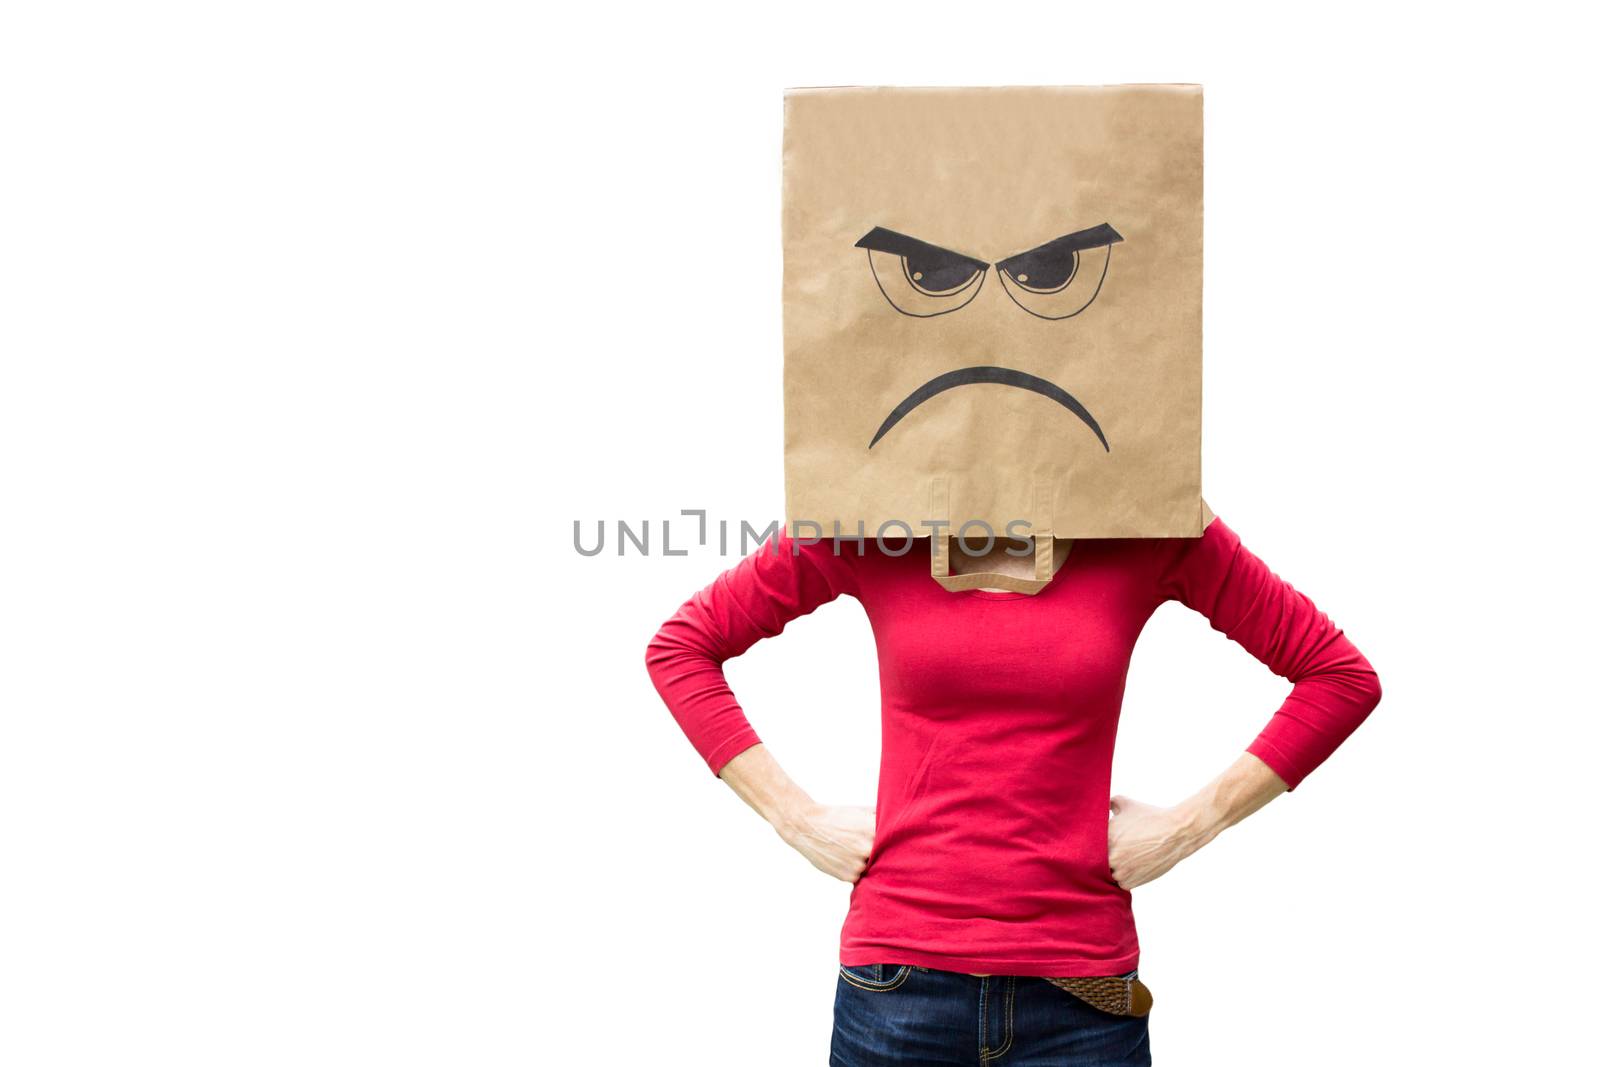 Angry woman wearing paper bag showing facial expression of frustration